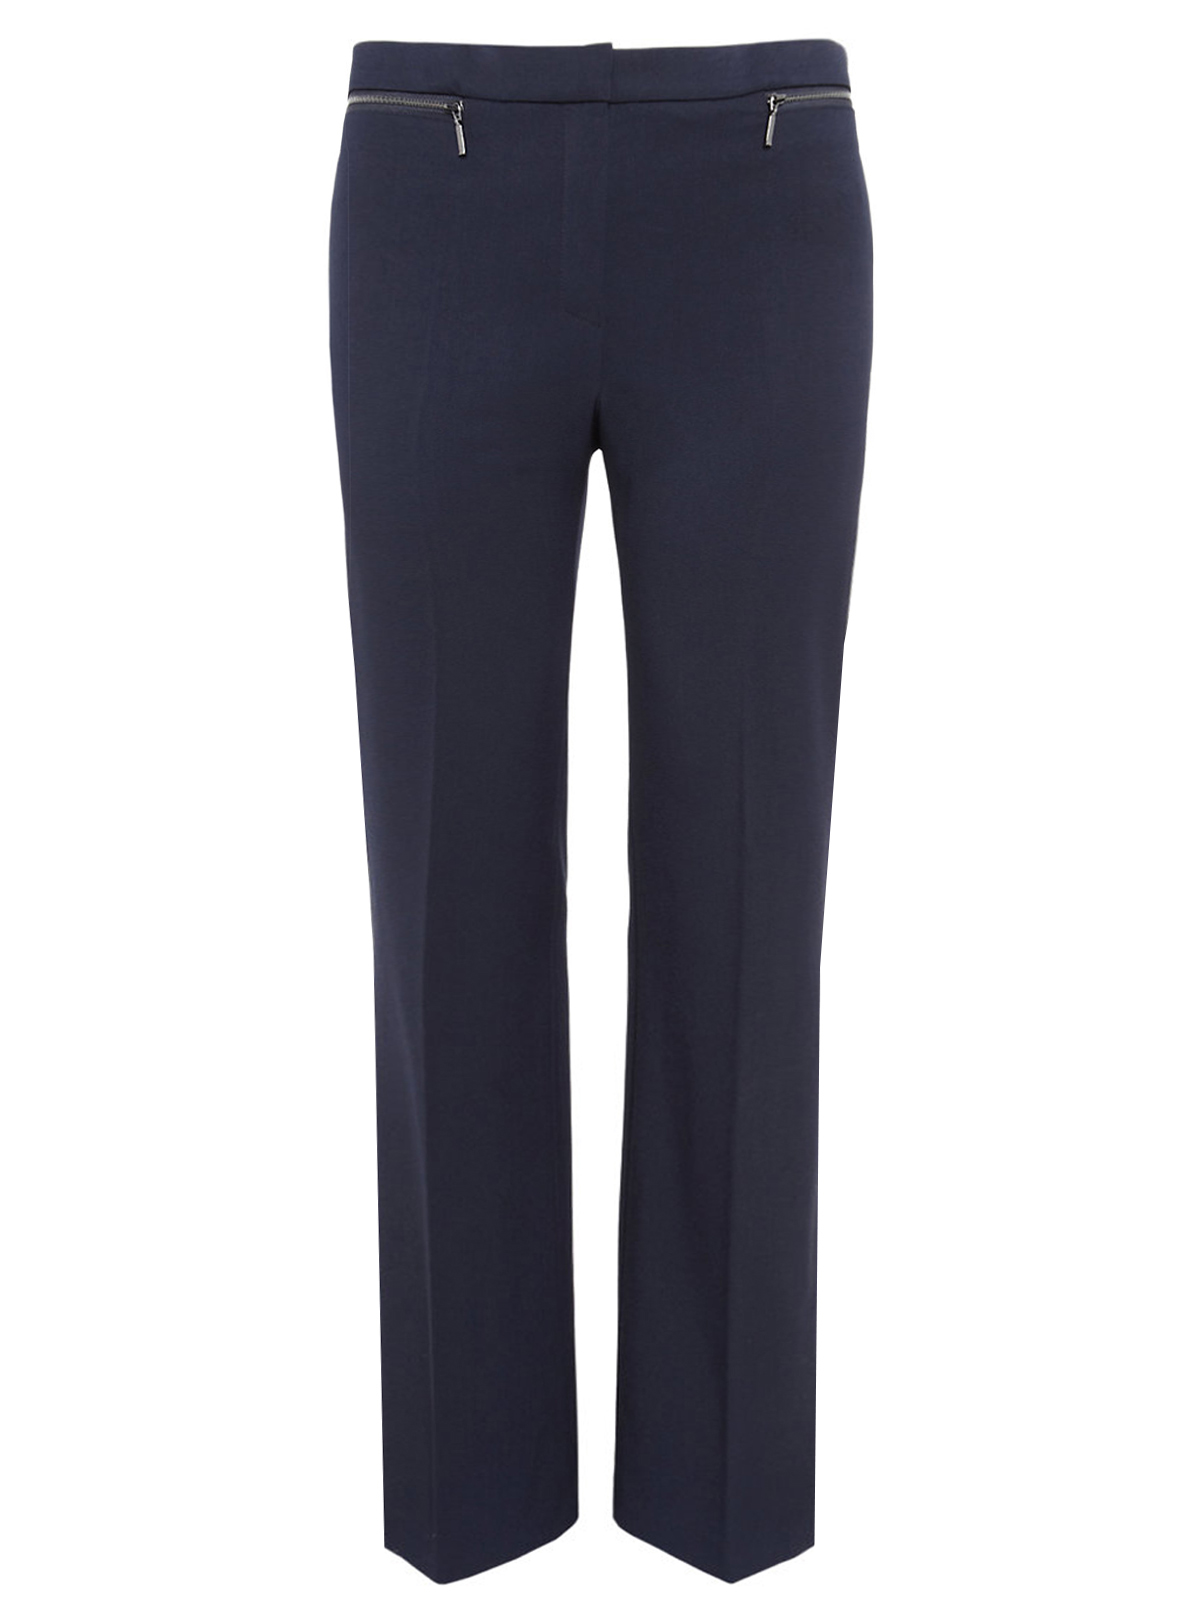 Marks and Spencer - - M&5 NAVY 2-Way Stretch Straight Leg Zip Pockets Trousers - Size 10 to 22